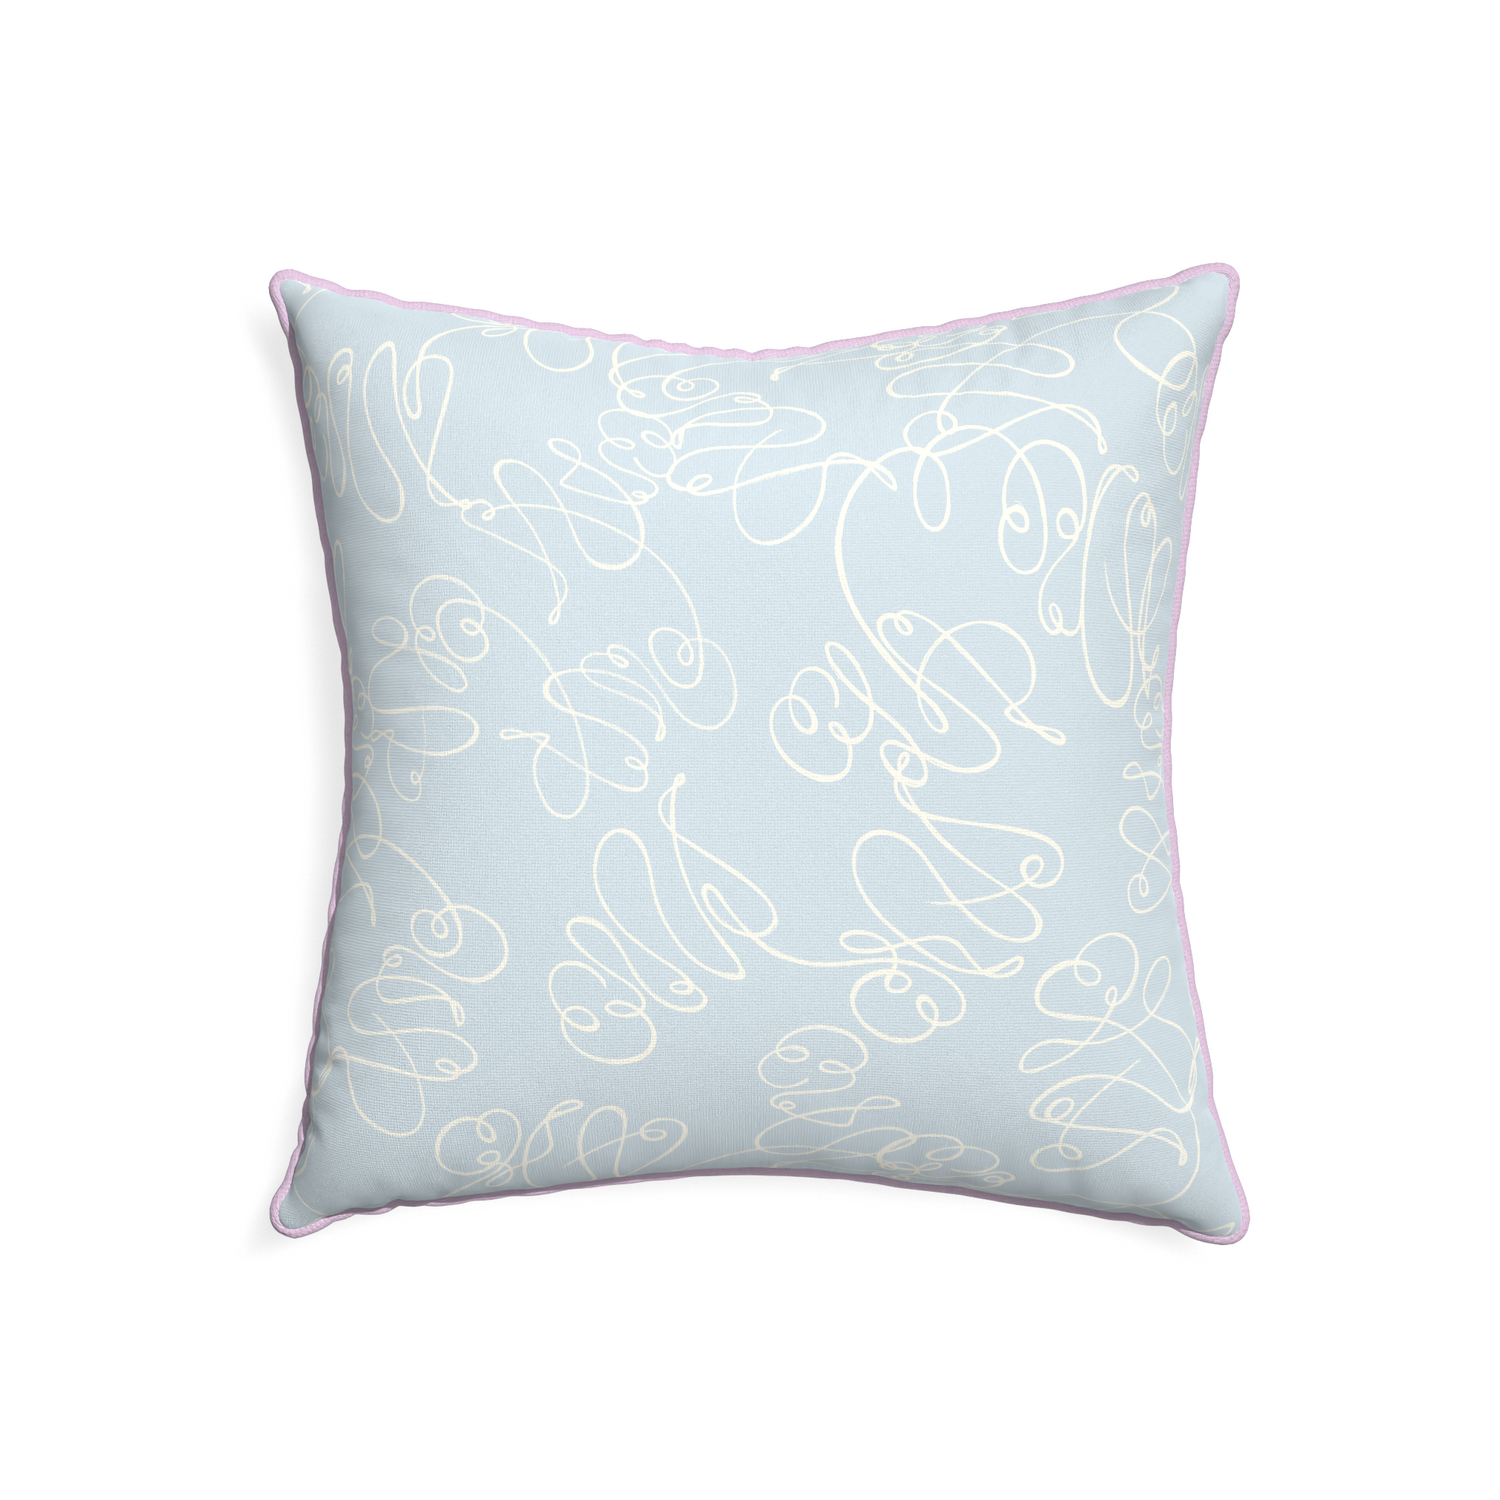 22-square mirabella custom powder blue abstractpillow with l piping on white background